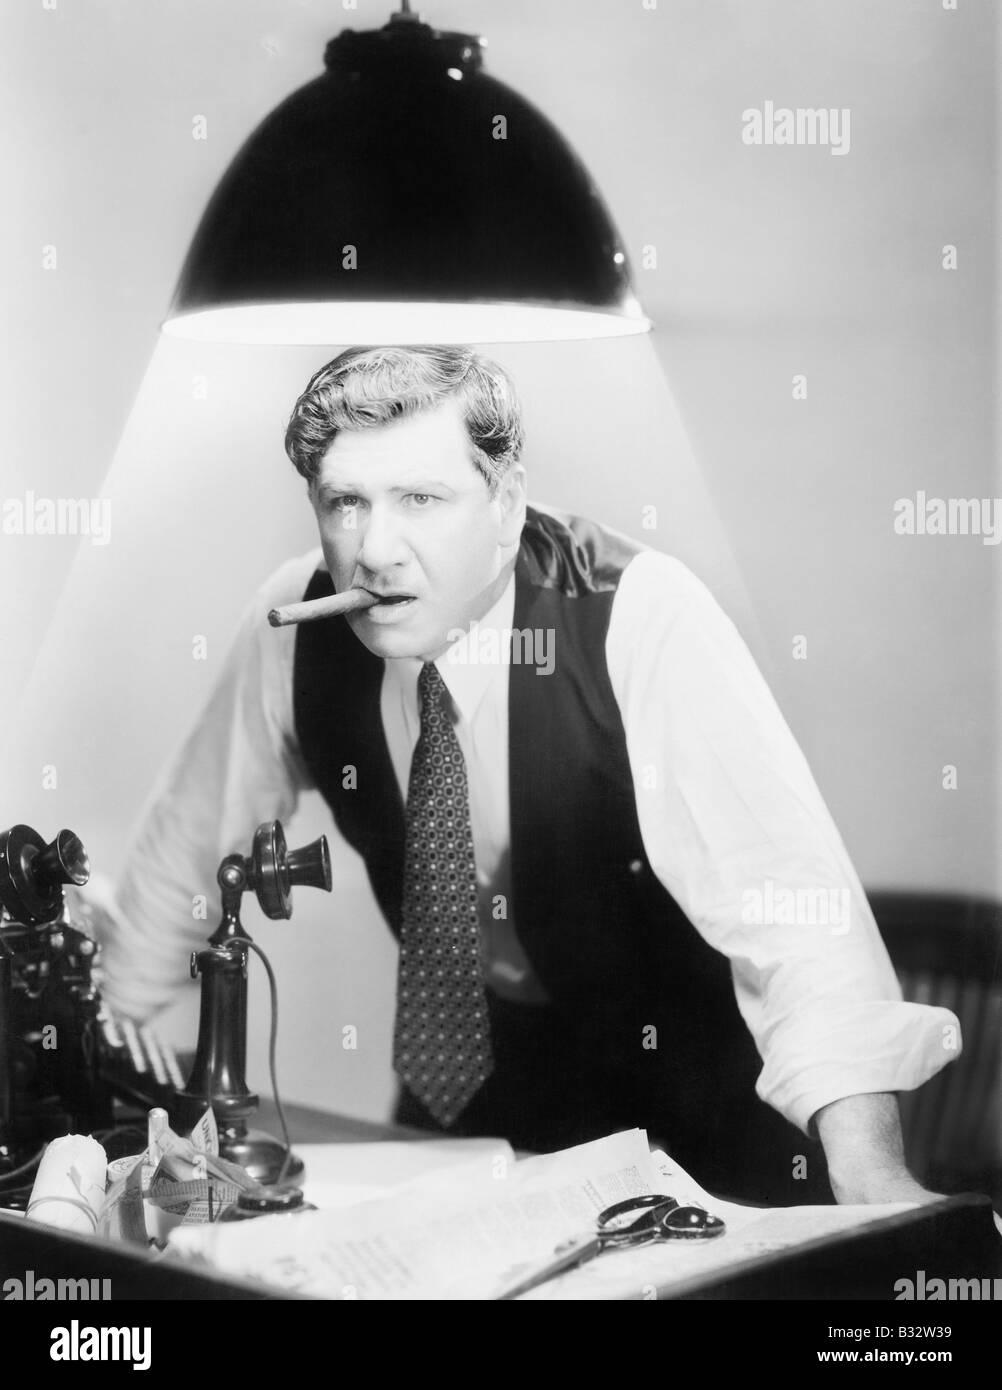 Man leaning over desk with ceiling light shining on him Stock Photo